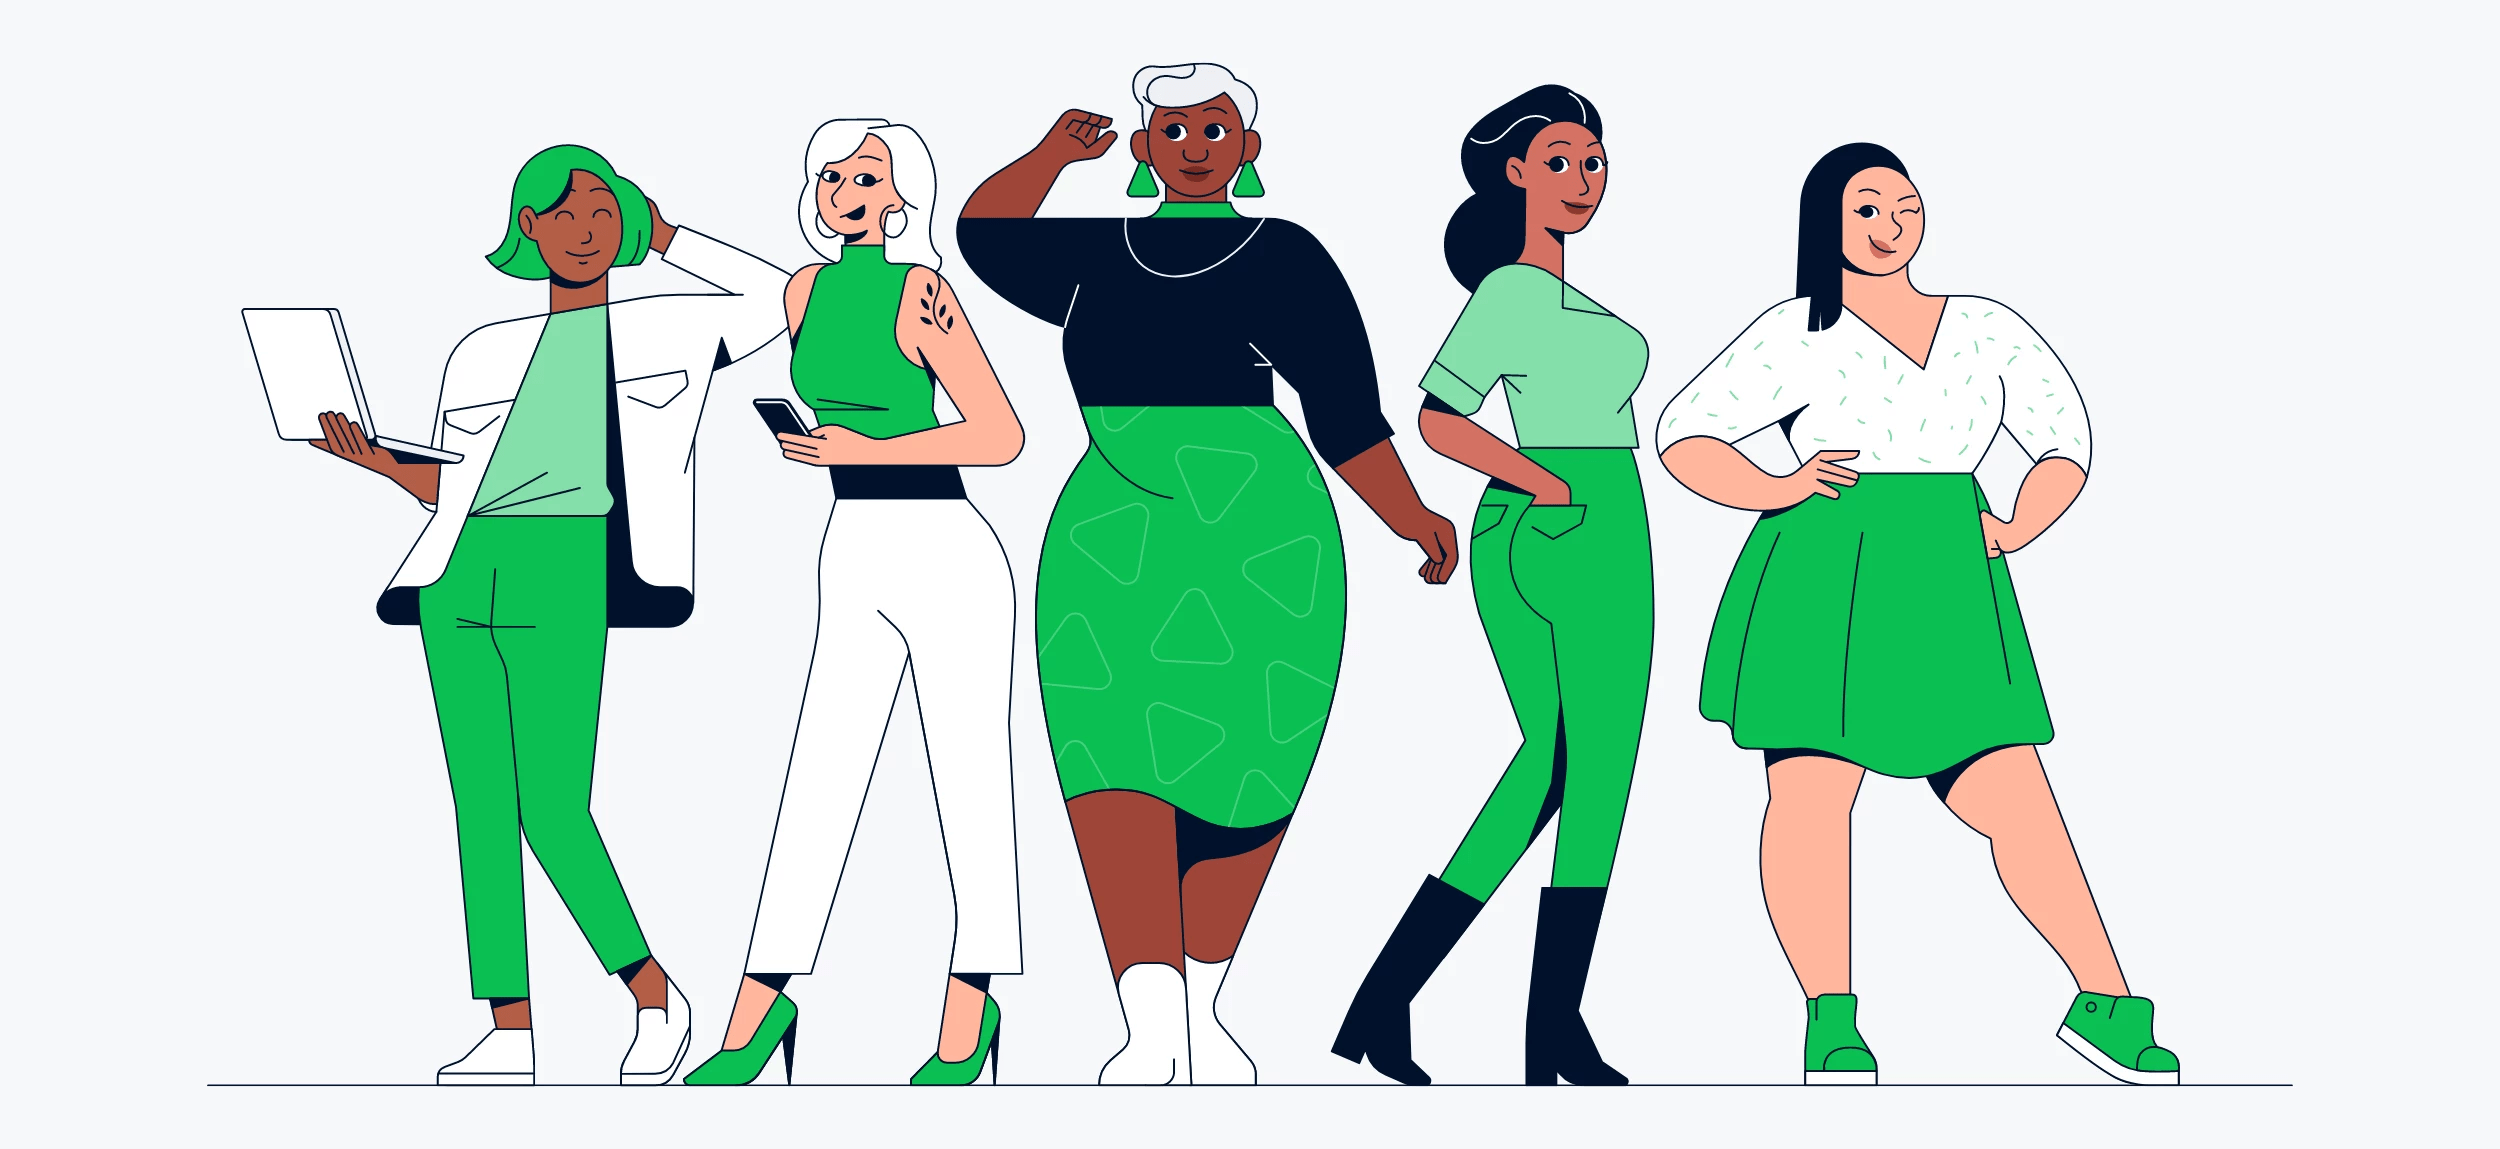 Illustrations of diverse group of females